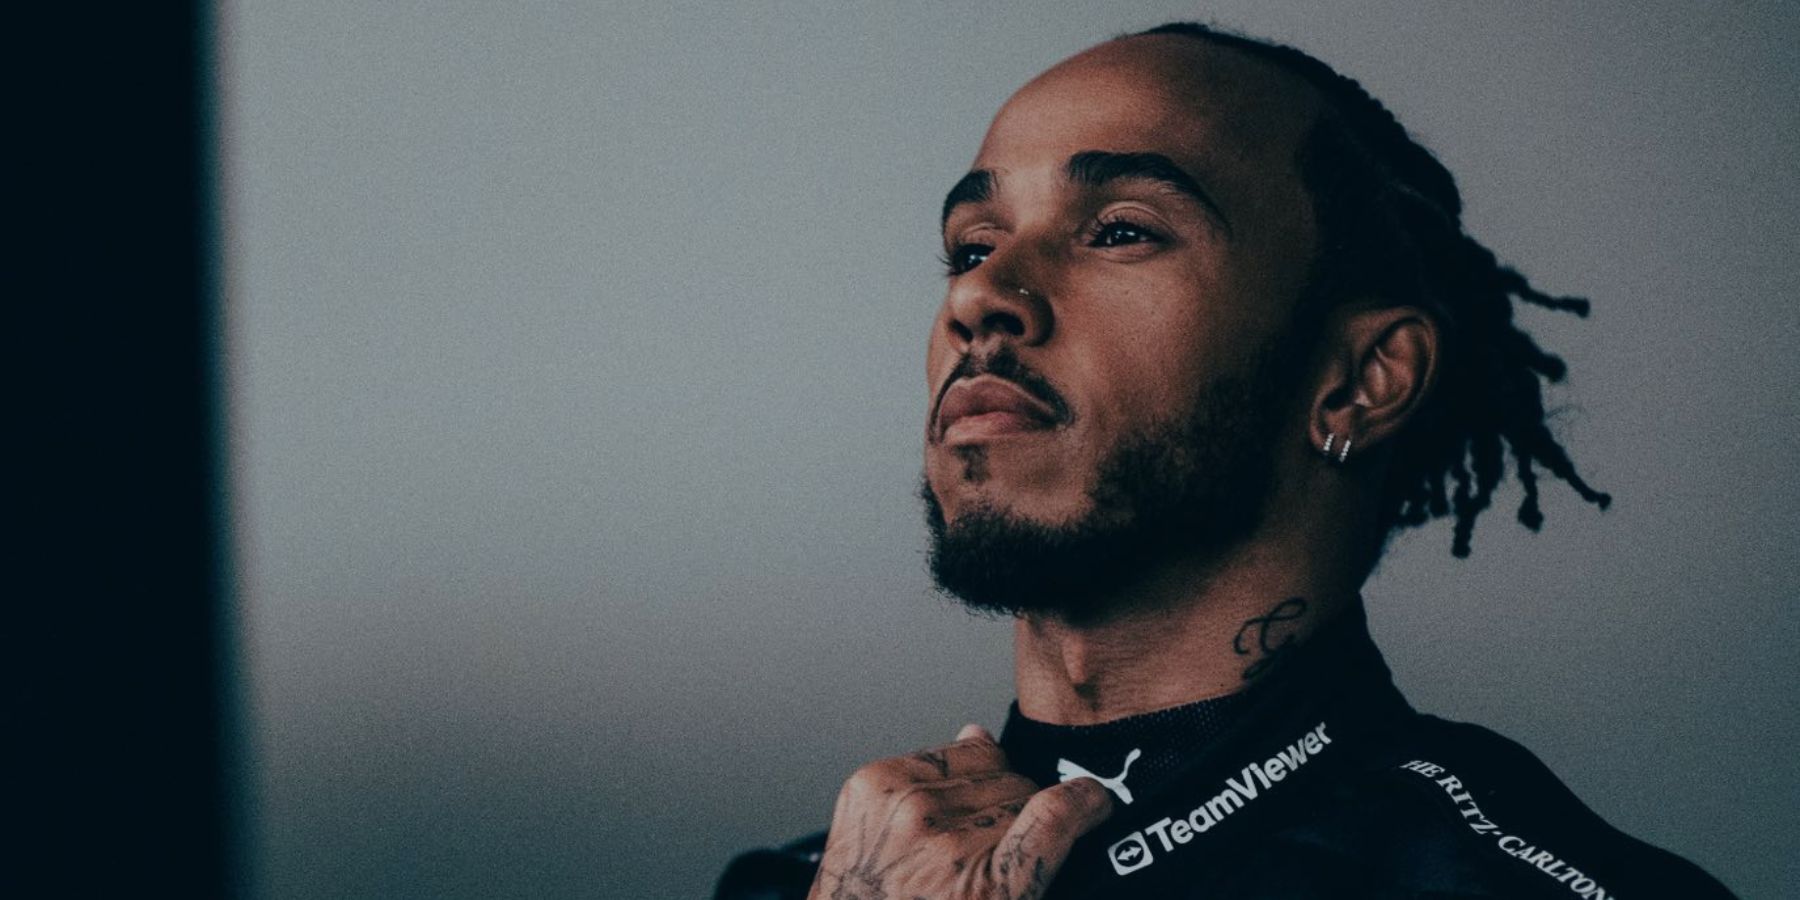 Lewis Hamilton shocks the sporting world with move from Mercedes to Ferrari